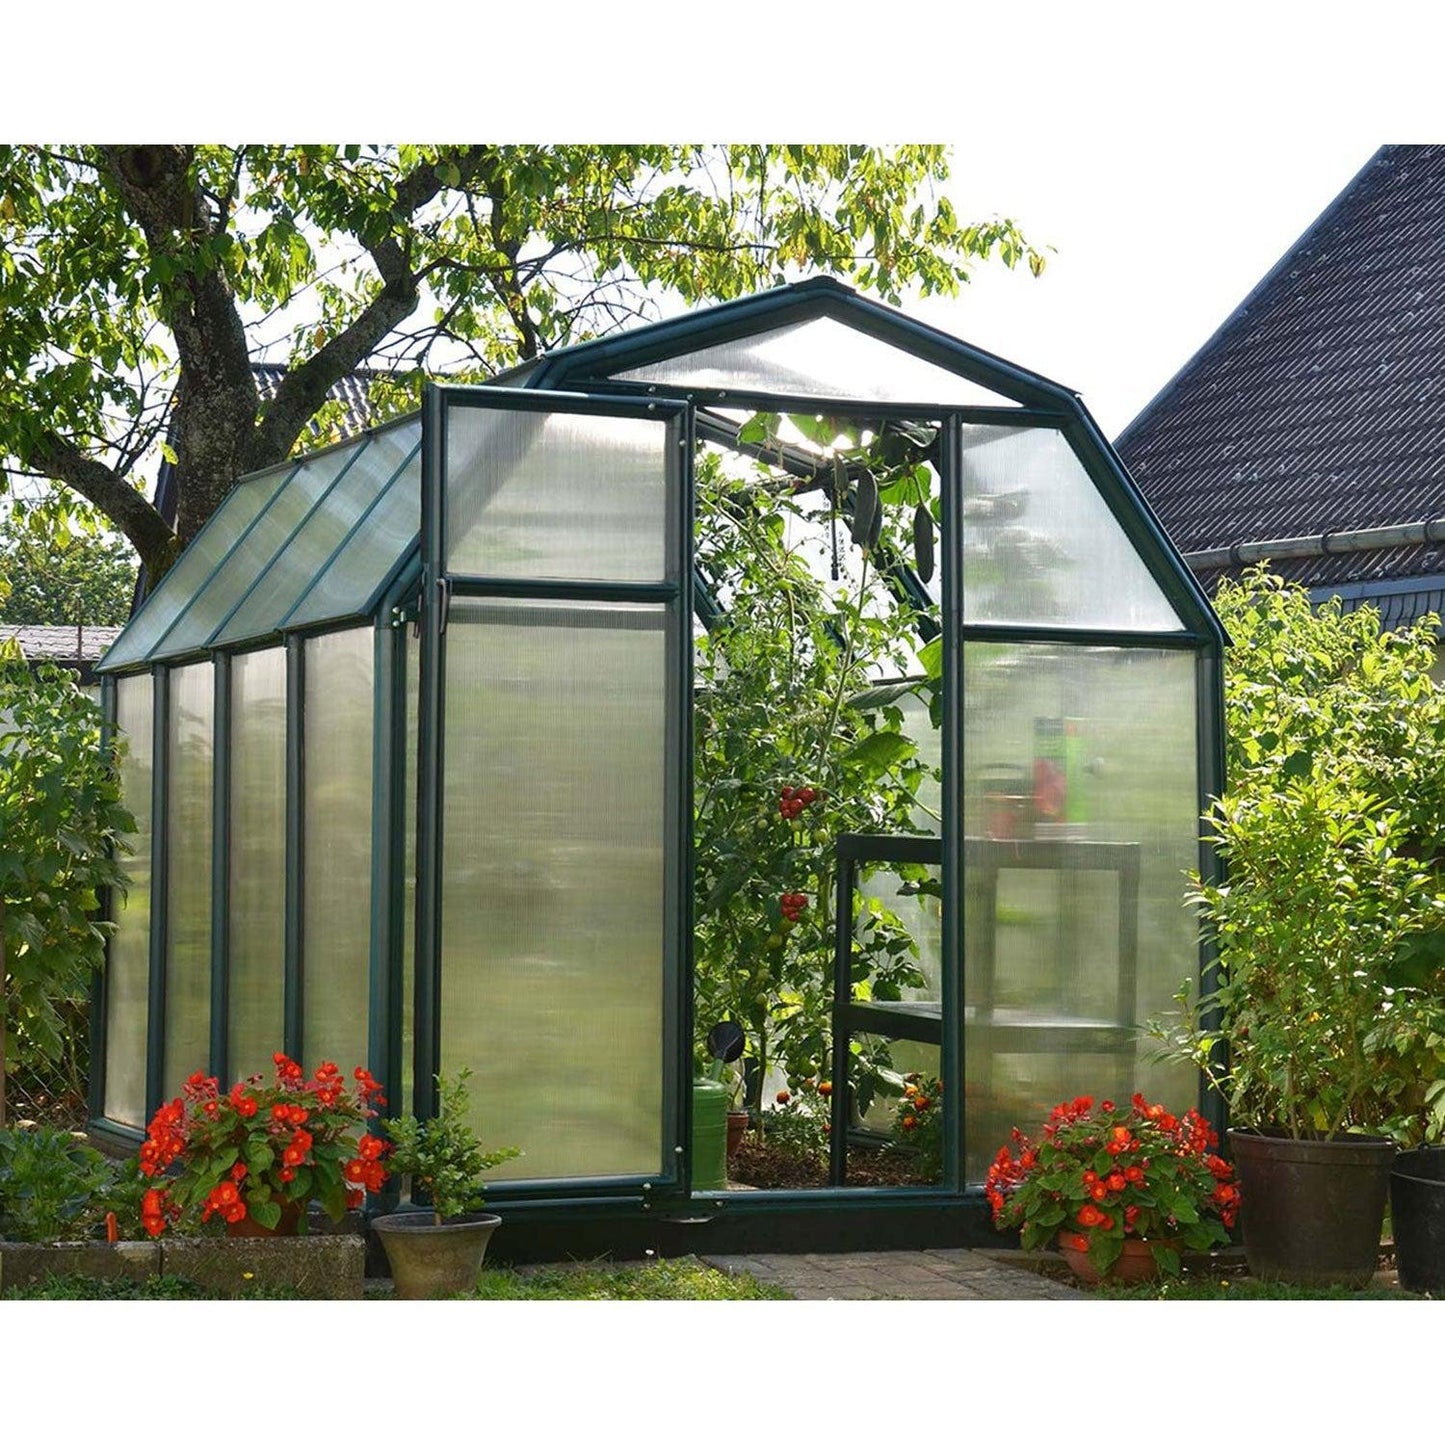 Rion EcoGrow Greenhouse 6 x 8 ft. - Delightful Yard